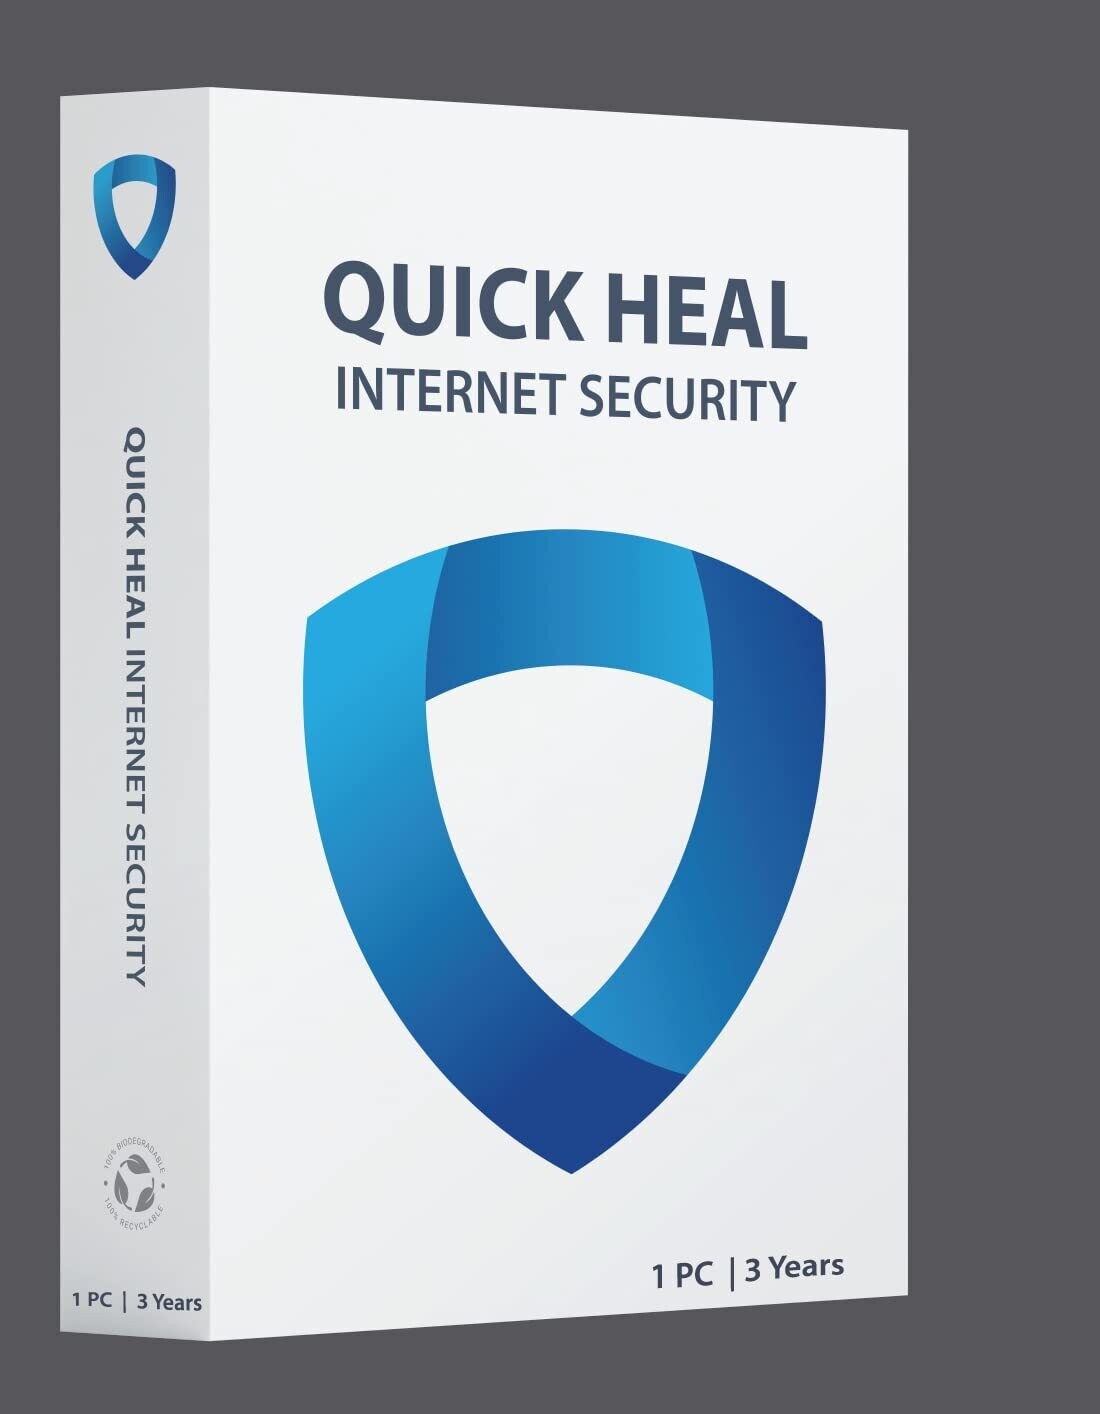 New, 1 User, 3 Year, Quick Heal Internet Security